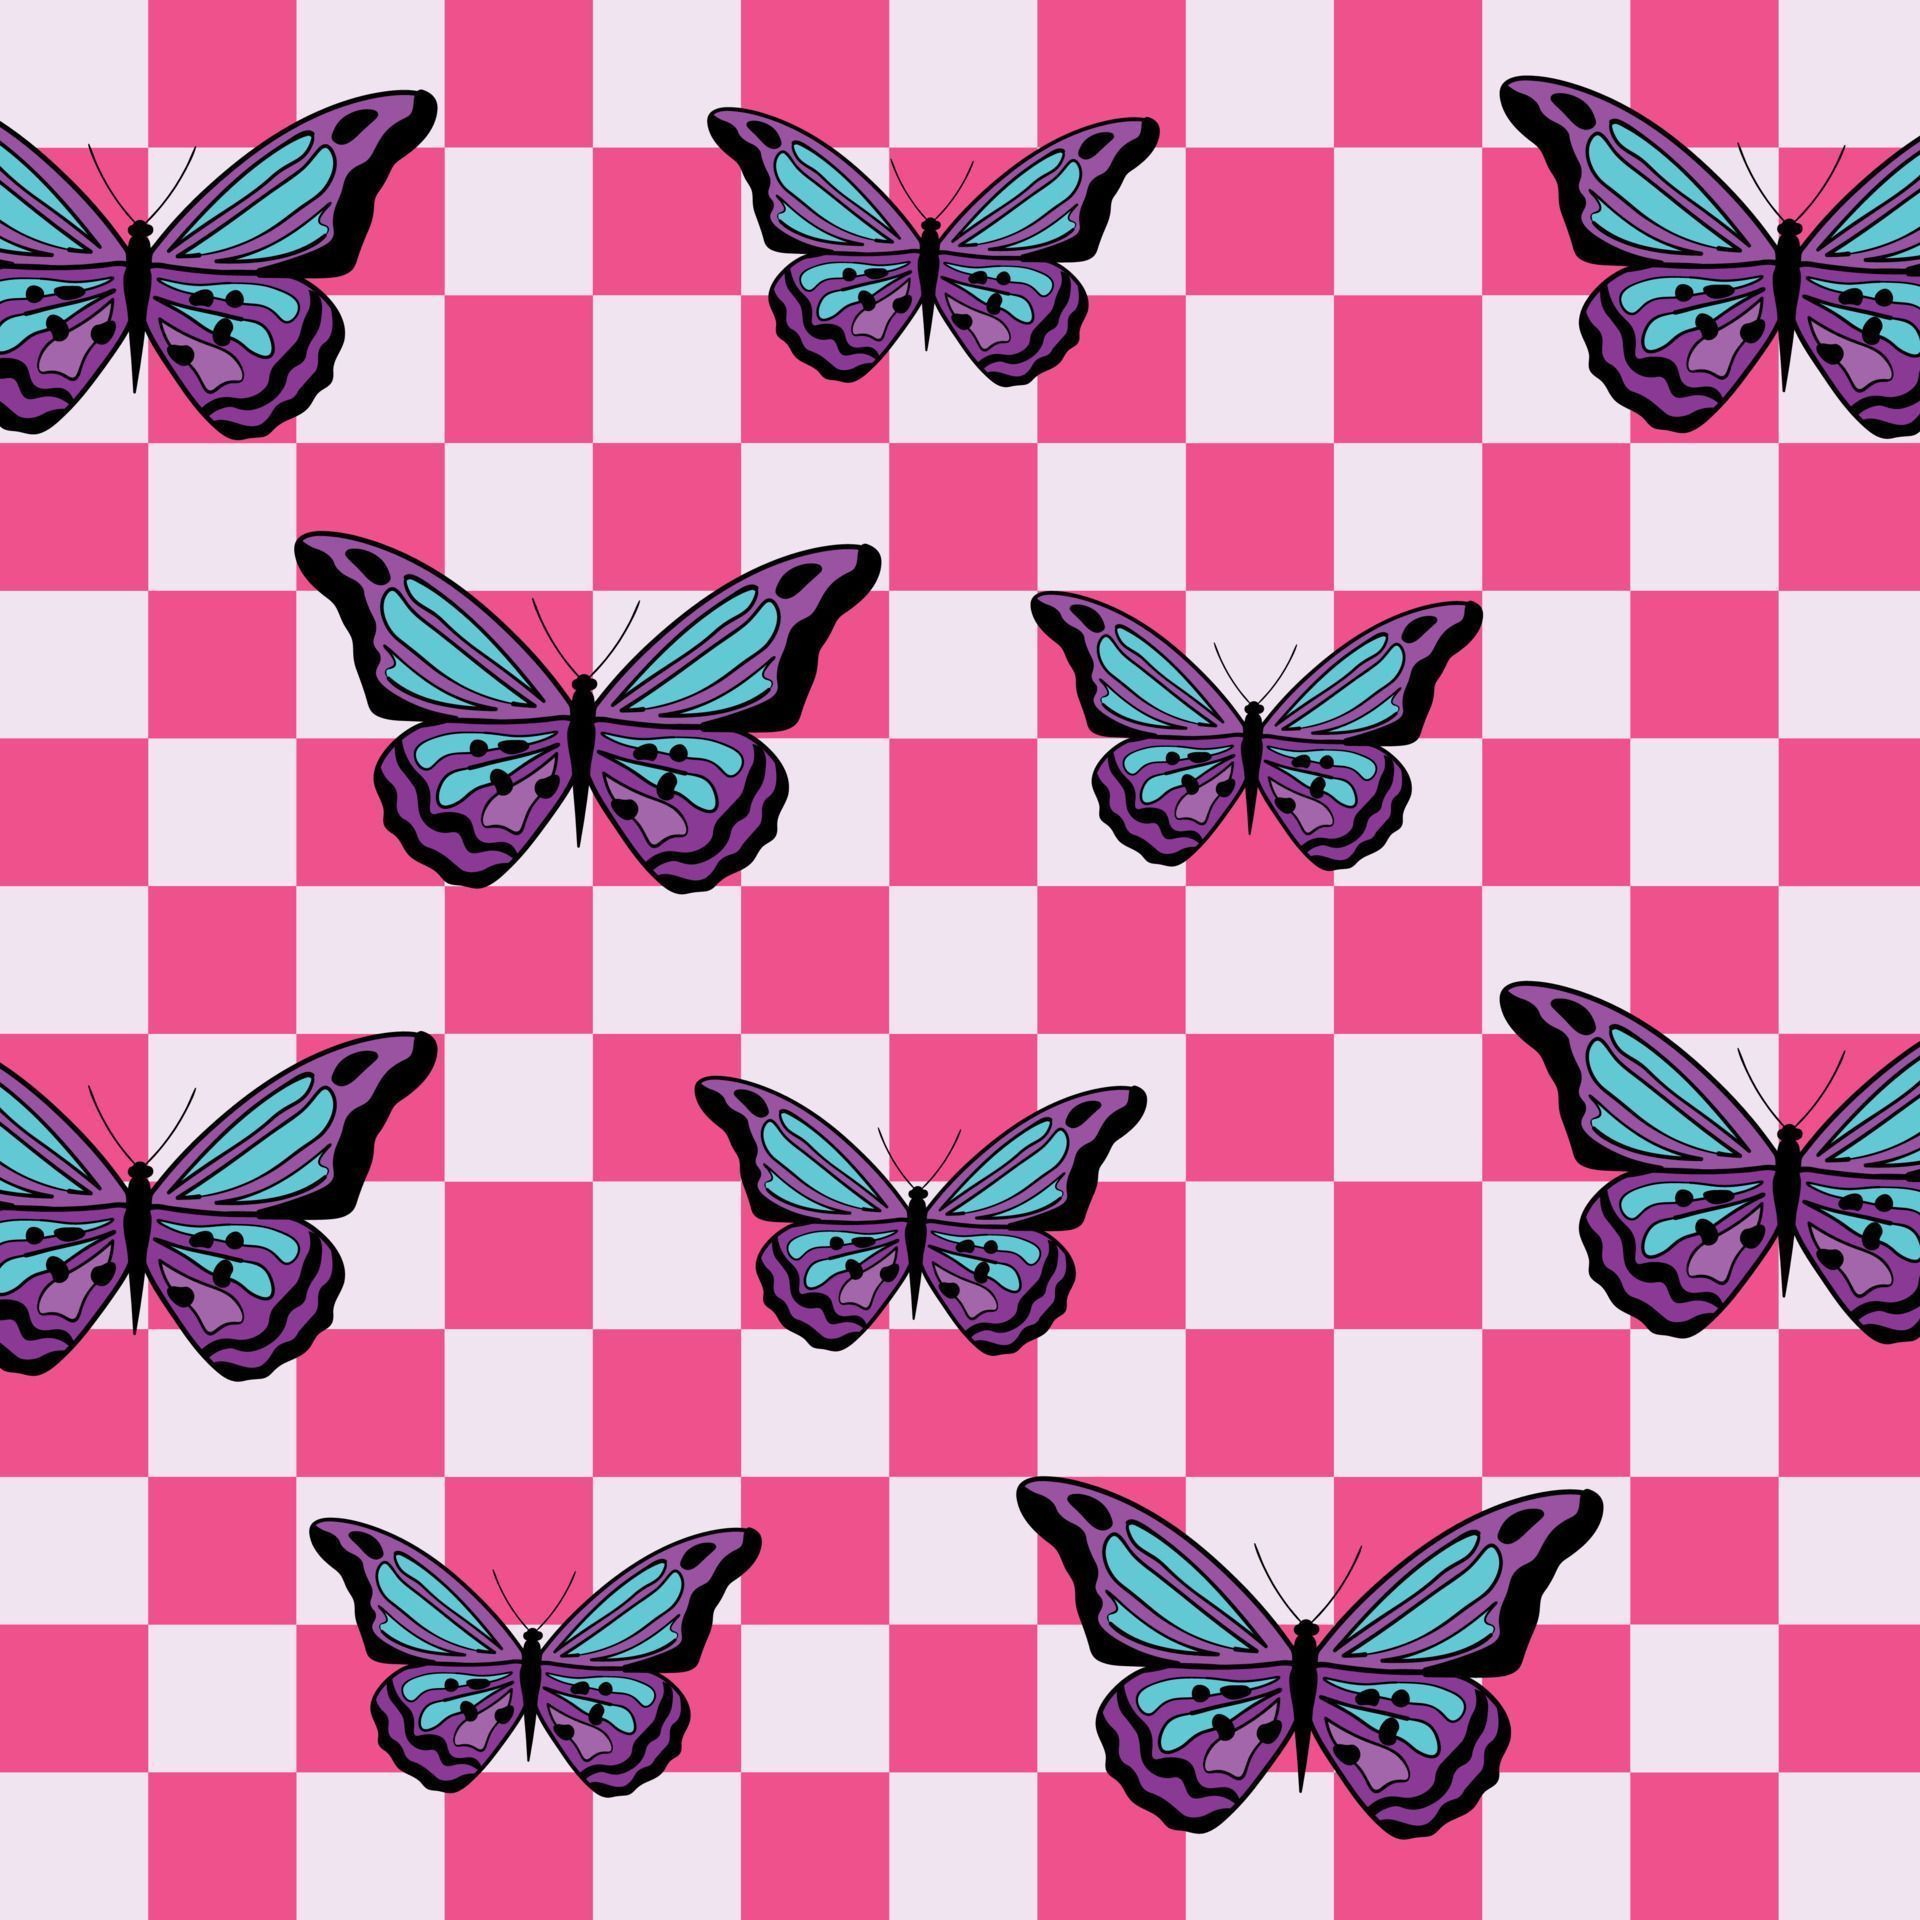 Y2k Pink Glamour Butterflies Background. Background in Trendy Emo Goth 2000s Style. 90s, 00s Aesthetic Wallpaper with Butterfly